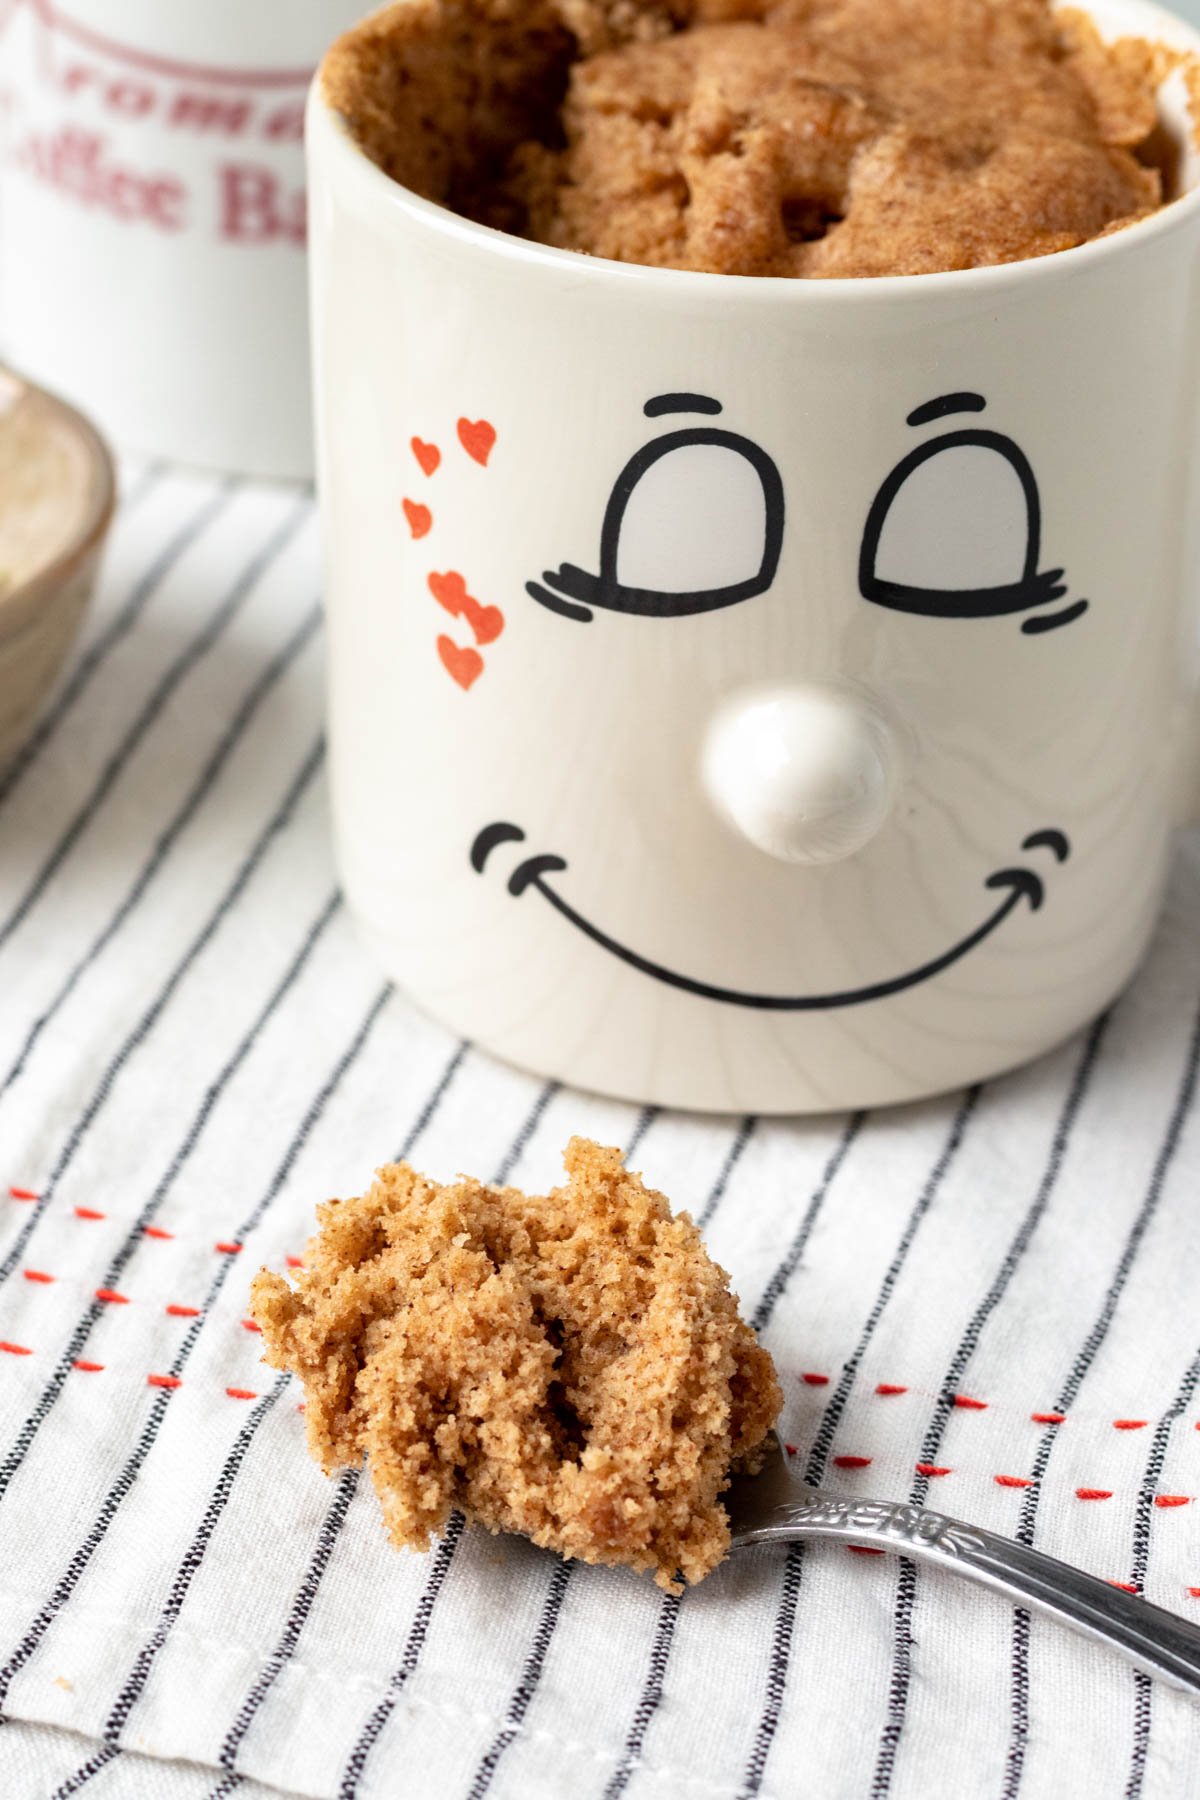 A spoonful of oatmeal mug cake resting in front of a mug.